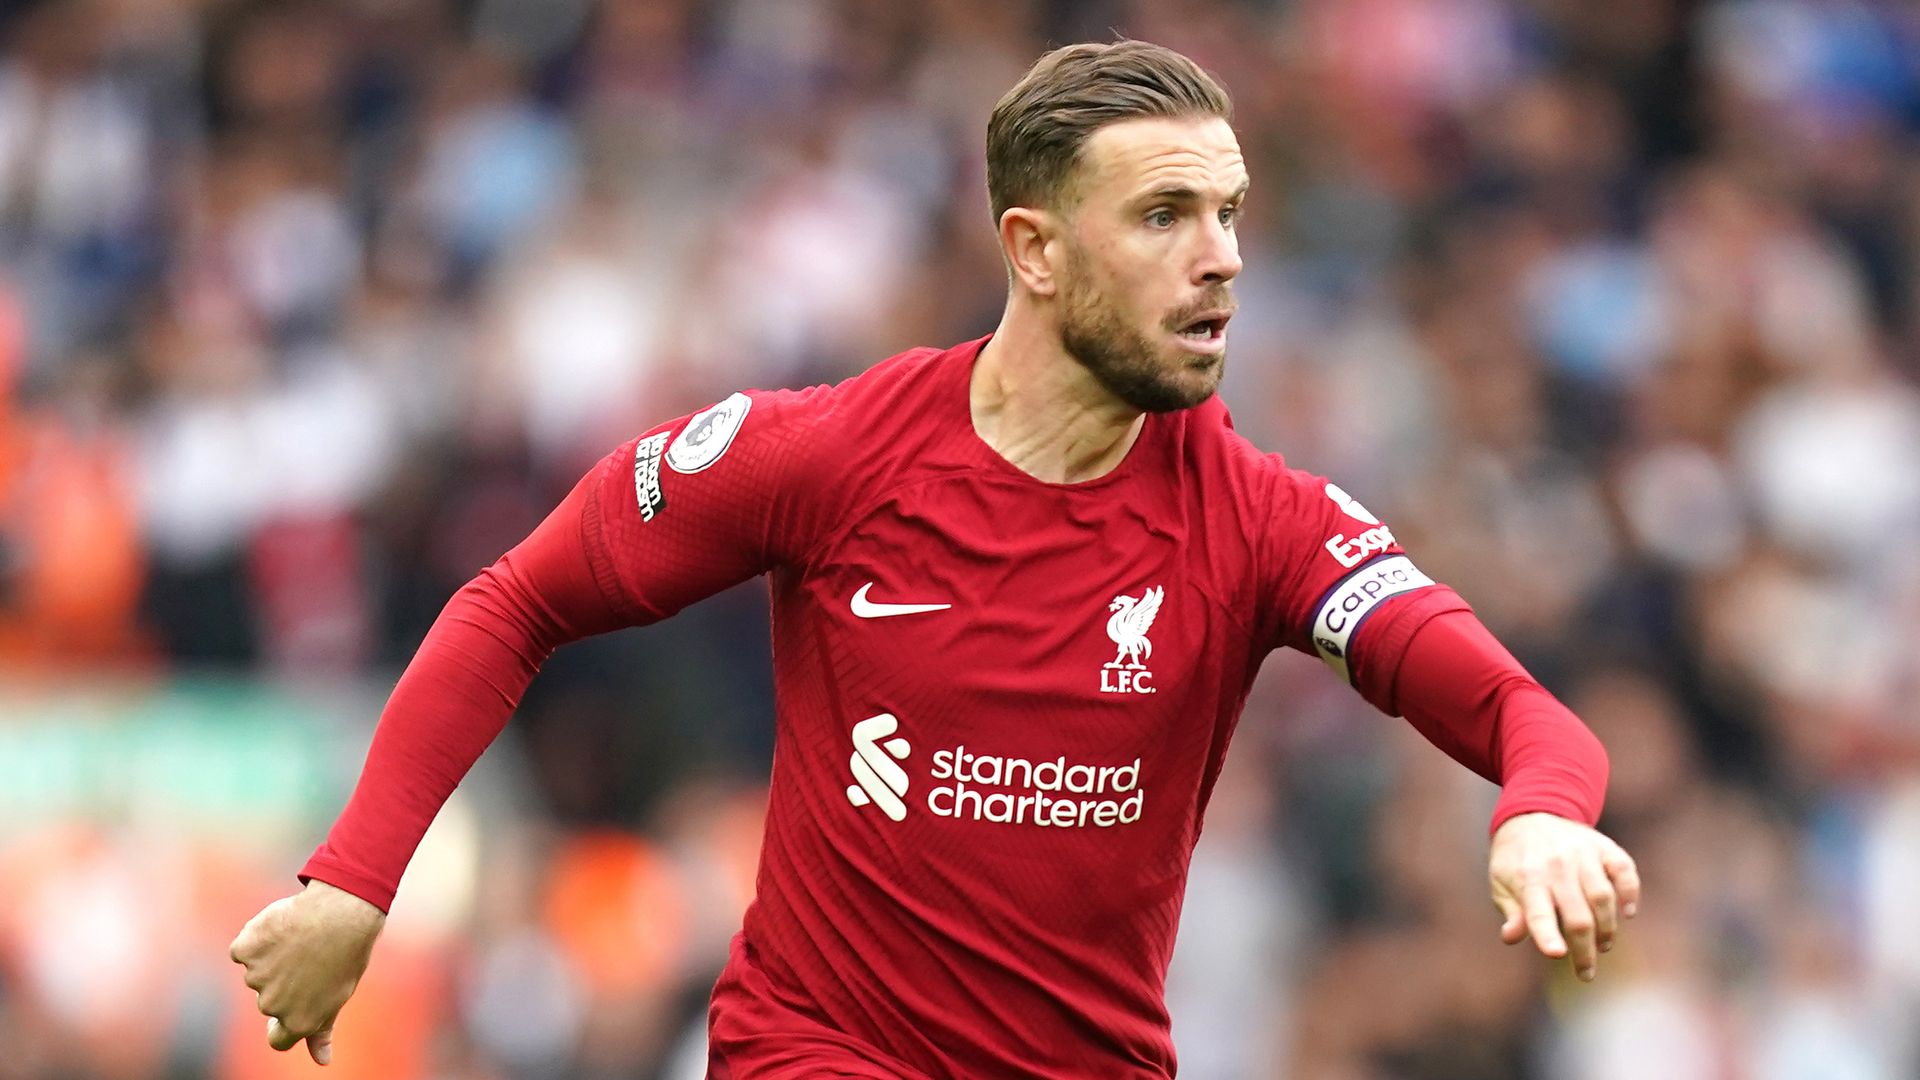 Back Pages: Henderson likely to accept 'life-changing' Saudi offer